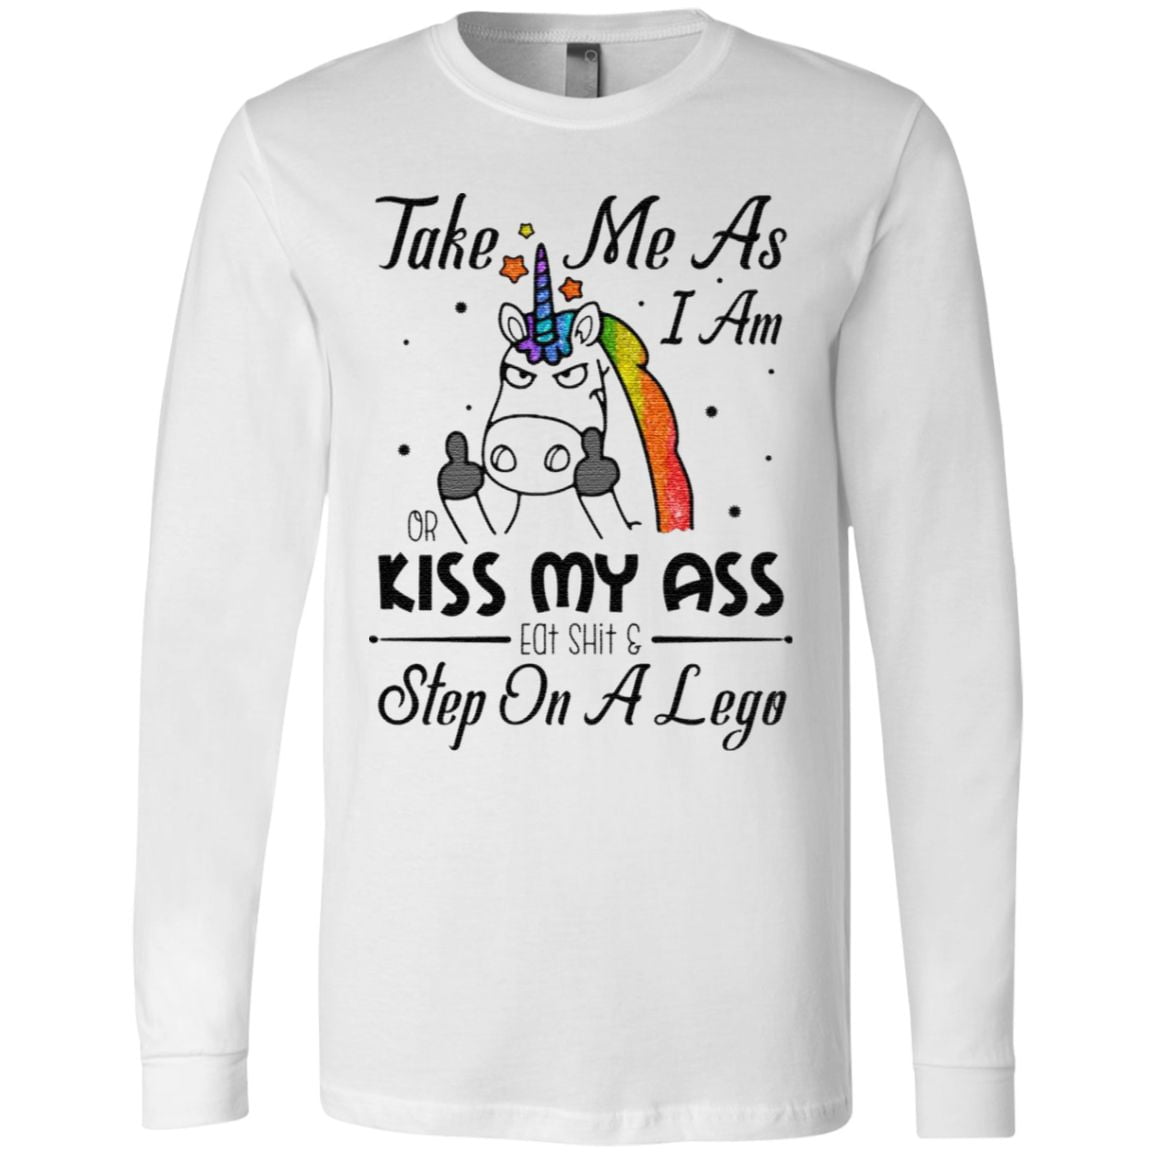 Take Me As I Am Or Kiss My Ass Eat Shit and Step On A Lego Sarcasm T-Shirt